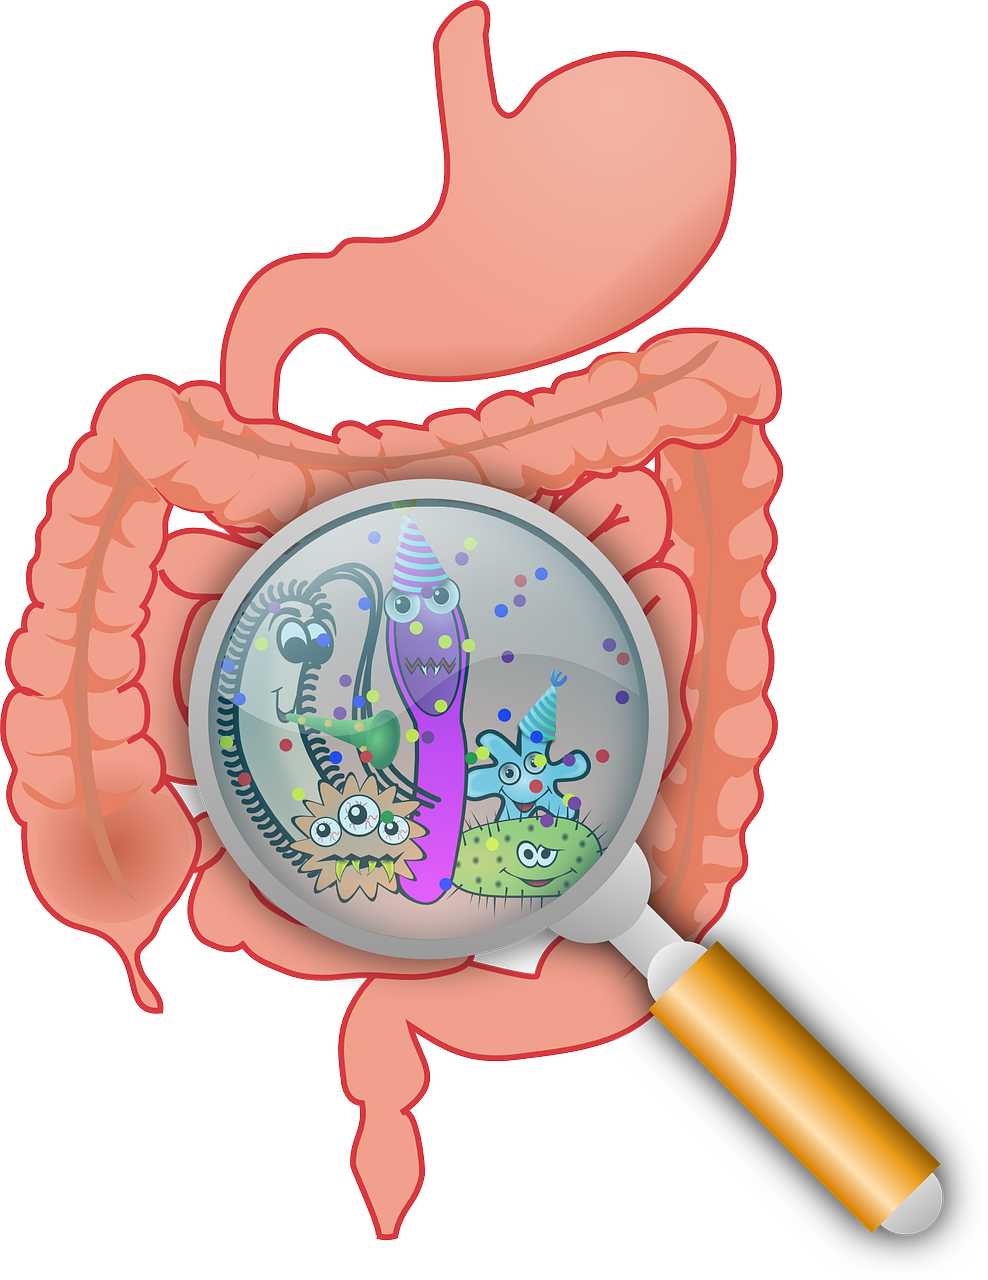 Image shows cross section of the stomach with caricatured bacteria inside